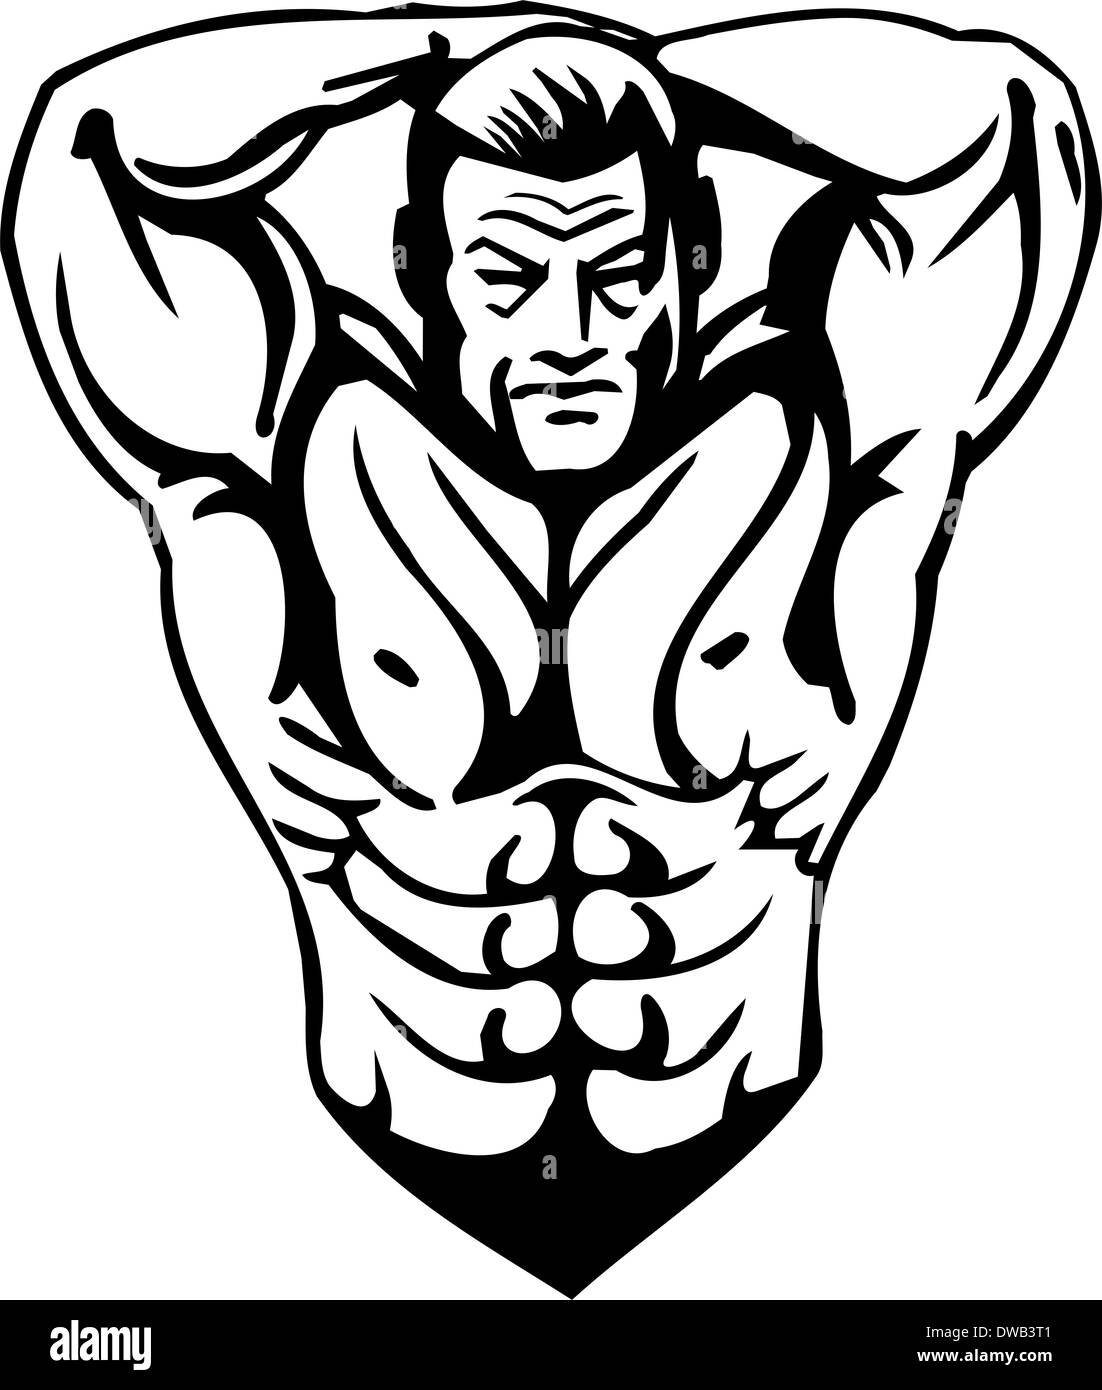 Bodybuilding and Powerlifting - vector illustration Stock Photo - Alamy